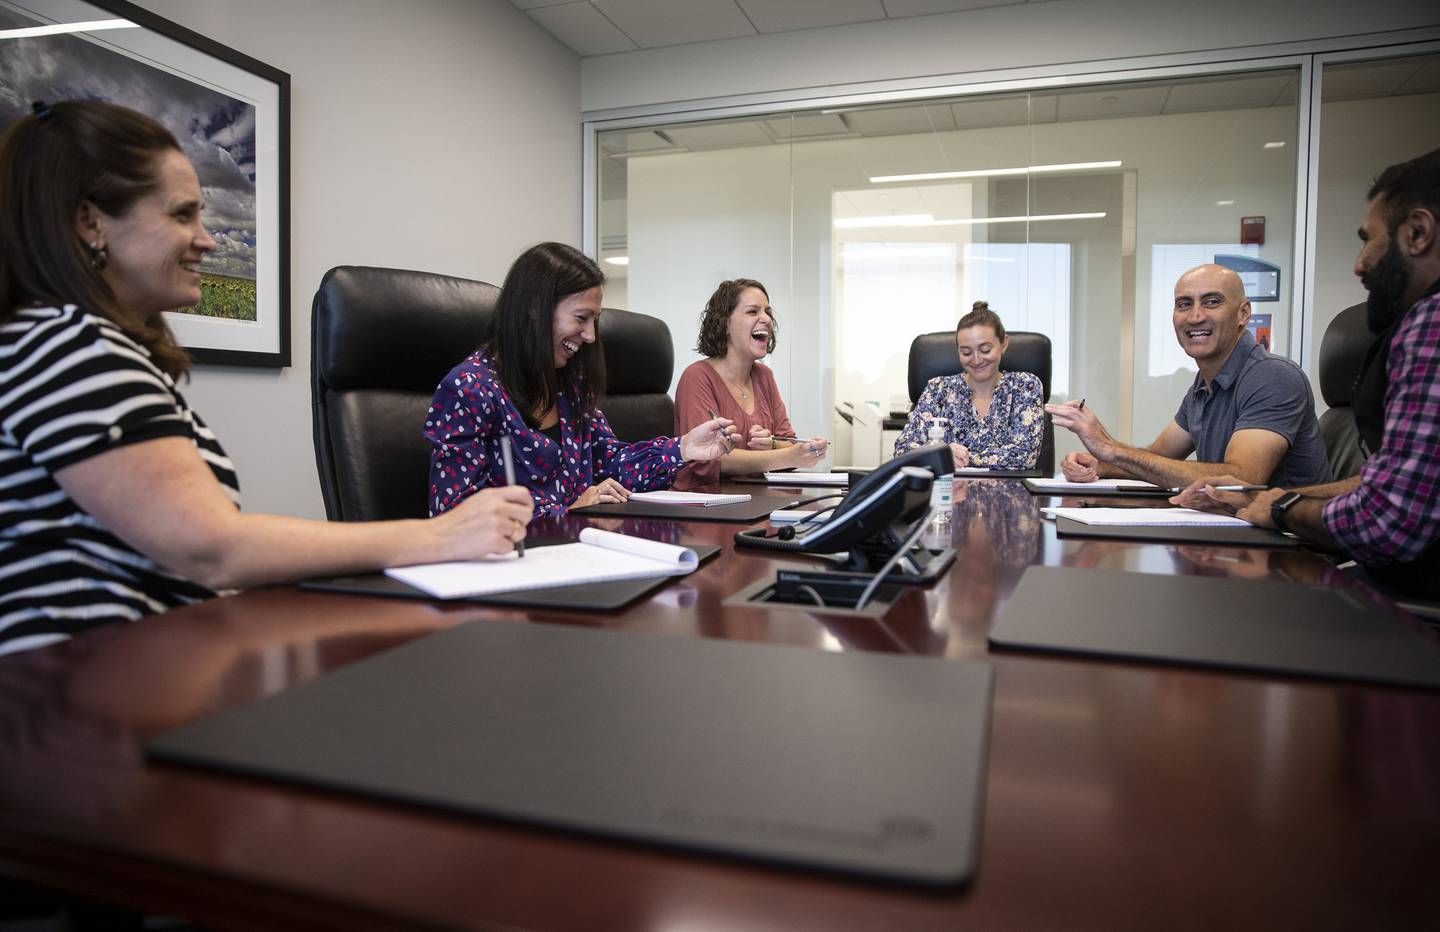 Program manager Susan Brown, of Chicago, from left, program manager Caroline Madden, of Elmhurst, training coordinator Lauren Kyriazes, of Schaumburg, assistant vice president, human resources Ally Watkins, of South Elgin, vice president of information technology Jean-Paul Lupori, of Elk Grove Village and finance manager Syed Bukhara, of Aurora, during a meeting at Captive Resources, Sept. 19, 2022, in Itasca.